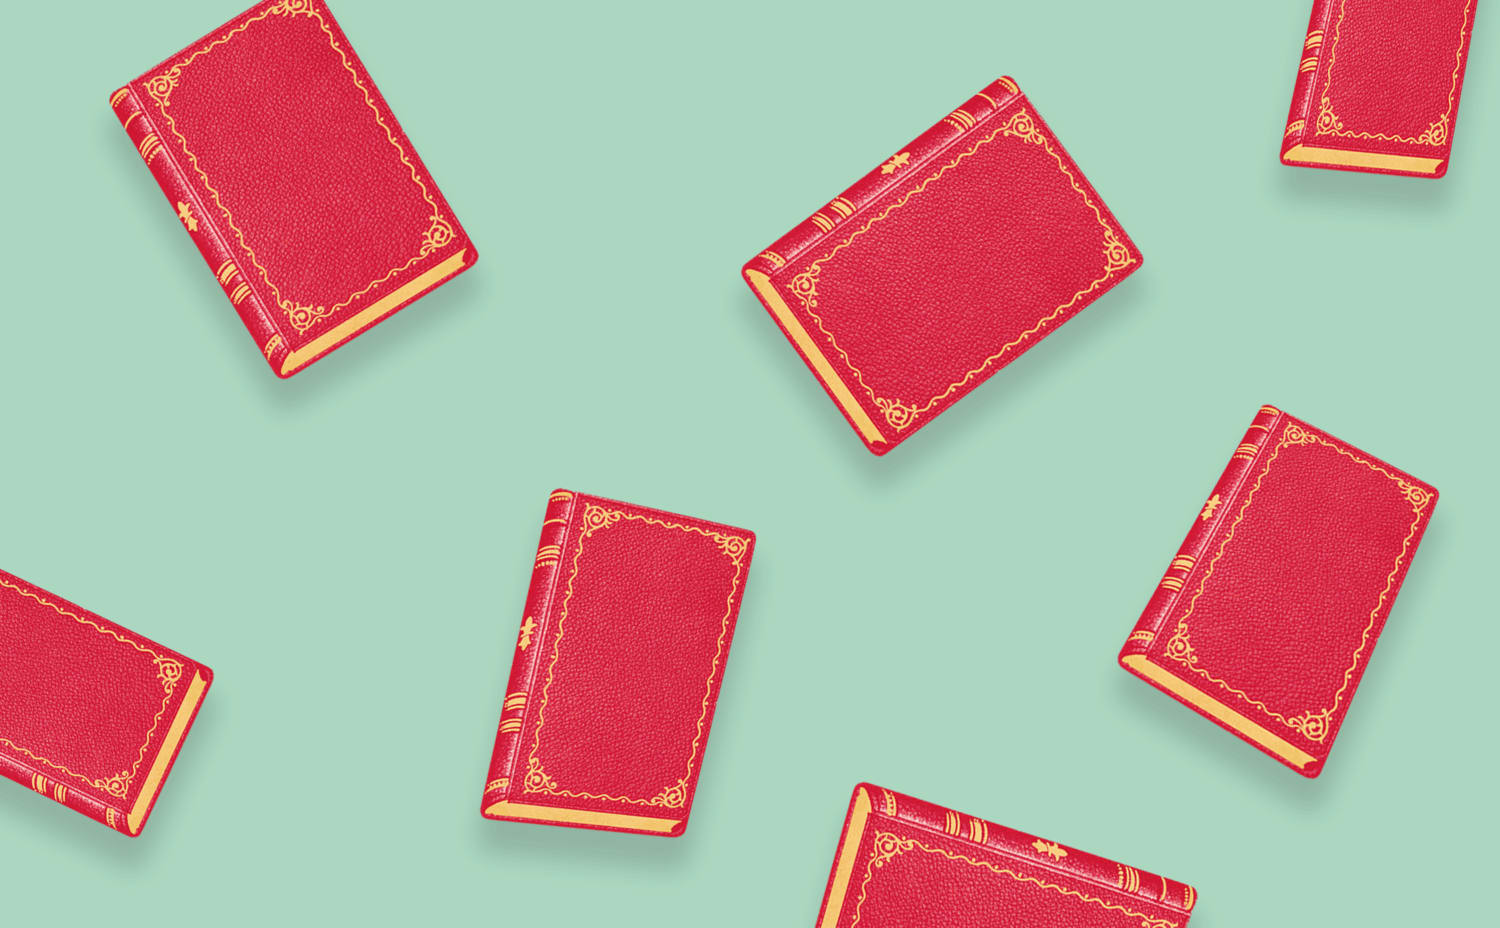 25 Books by TED Speakers That Will Expand Your Mind This Summer